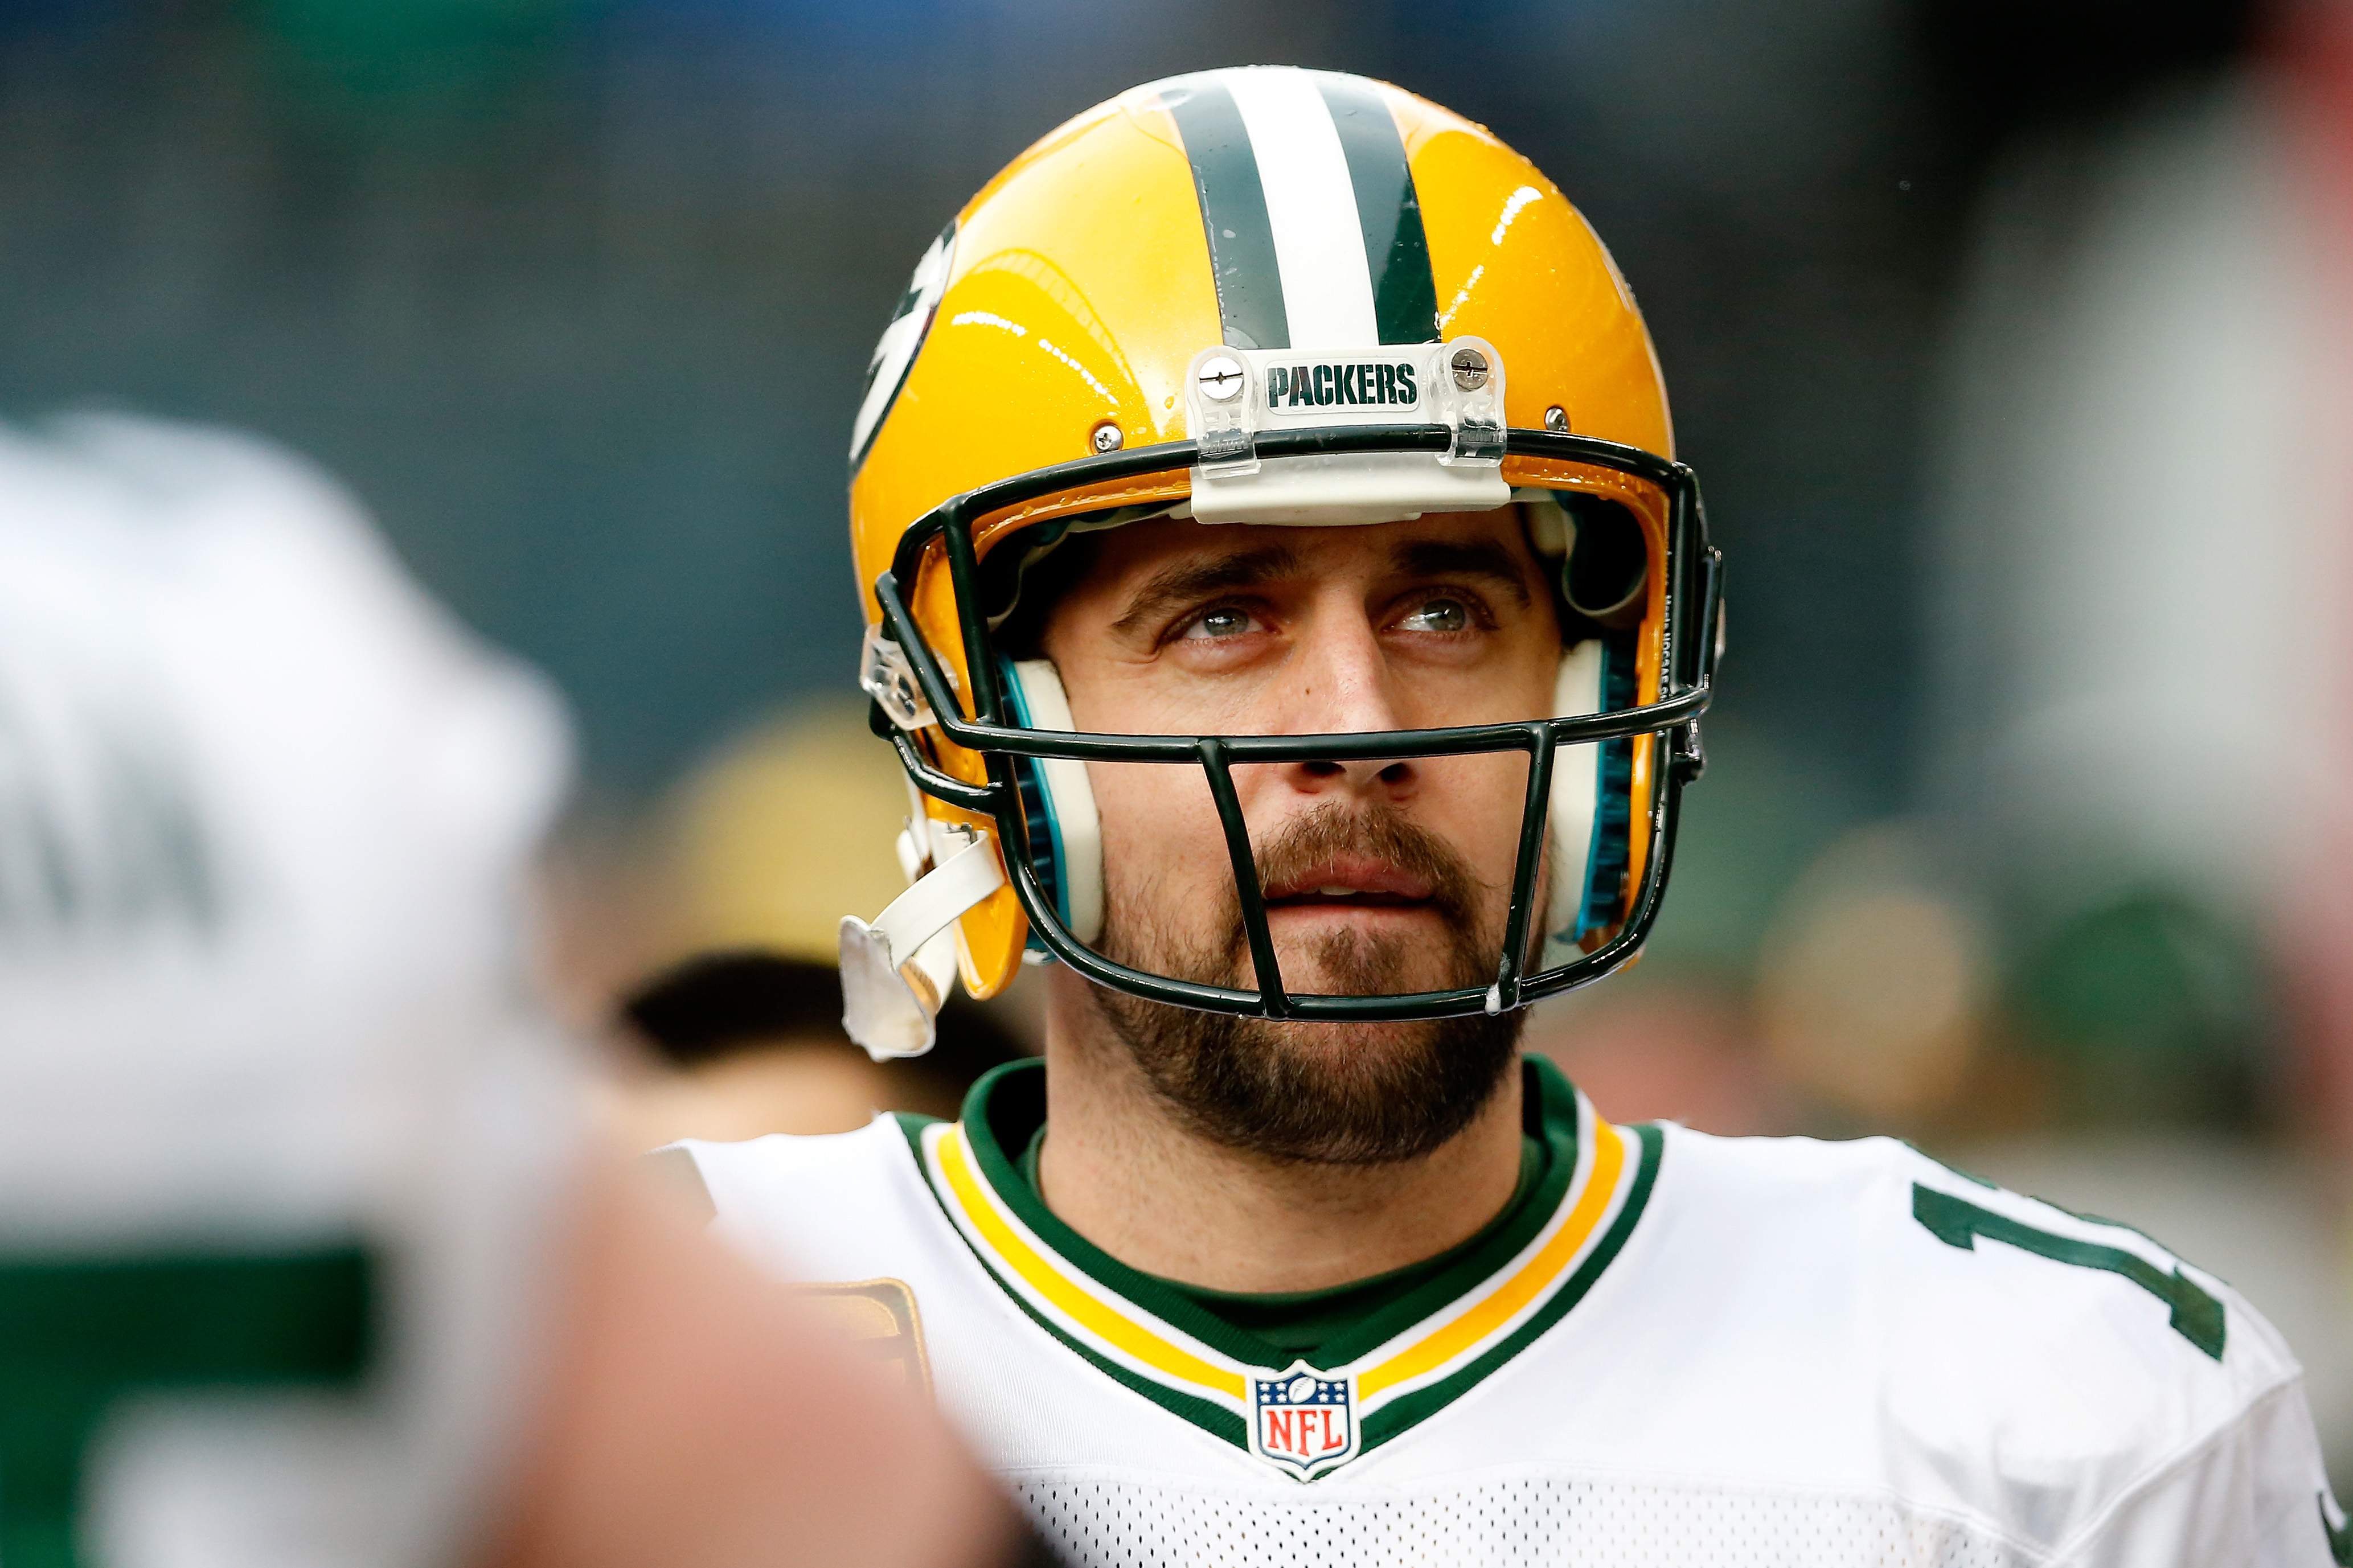 Aaron Rodgers of the Green Bay Packers looks up at the scoreboard during the fourth quarter of the 2015 NFC Championship game against the Seattle Seahawks at CenturyLink Field on Jan. 18, 2015 in Seattle. (Christian Petersen—Getty Images)